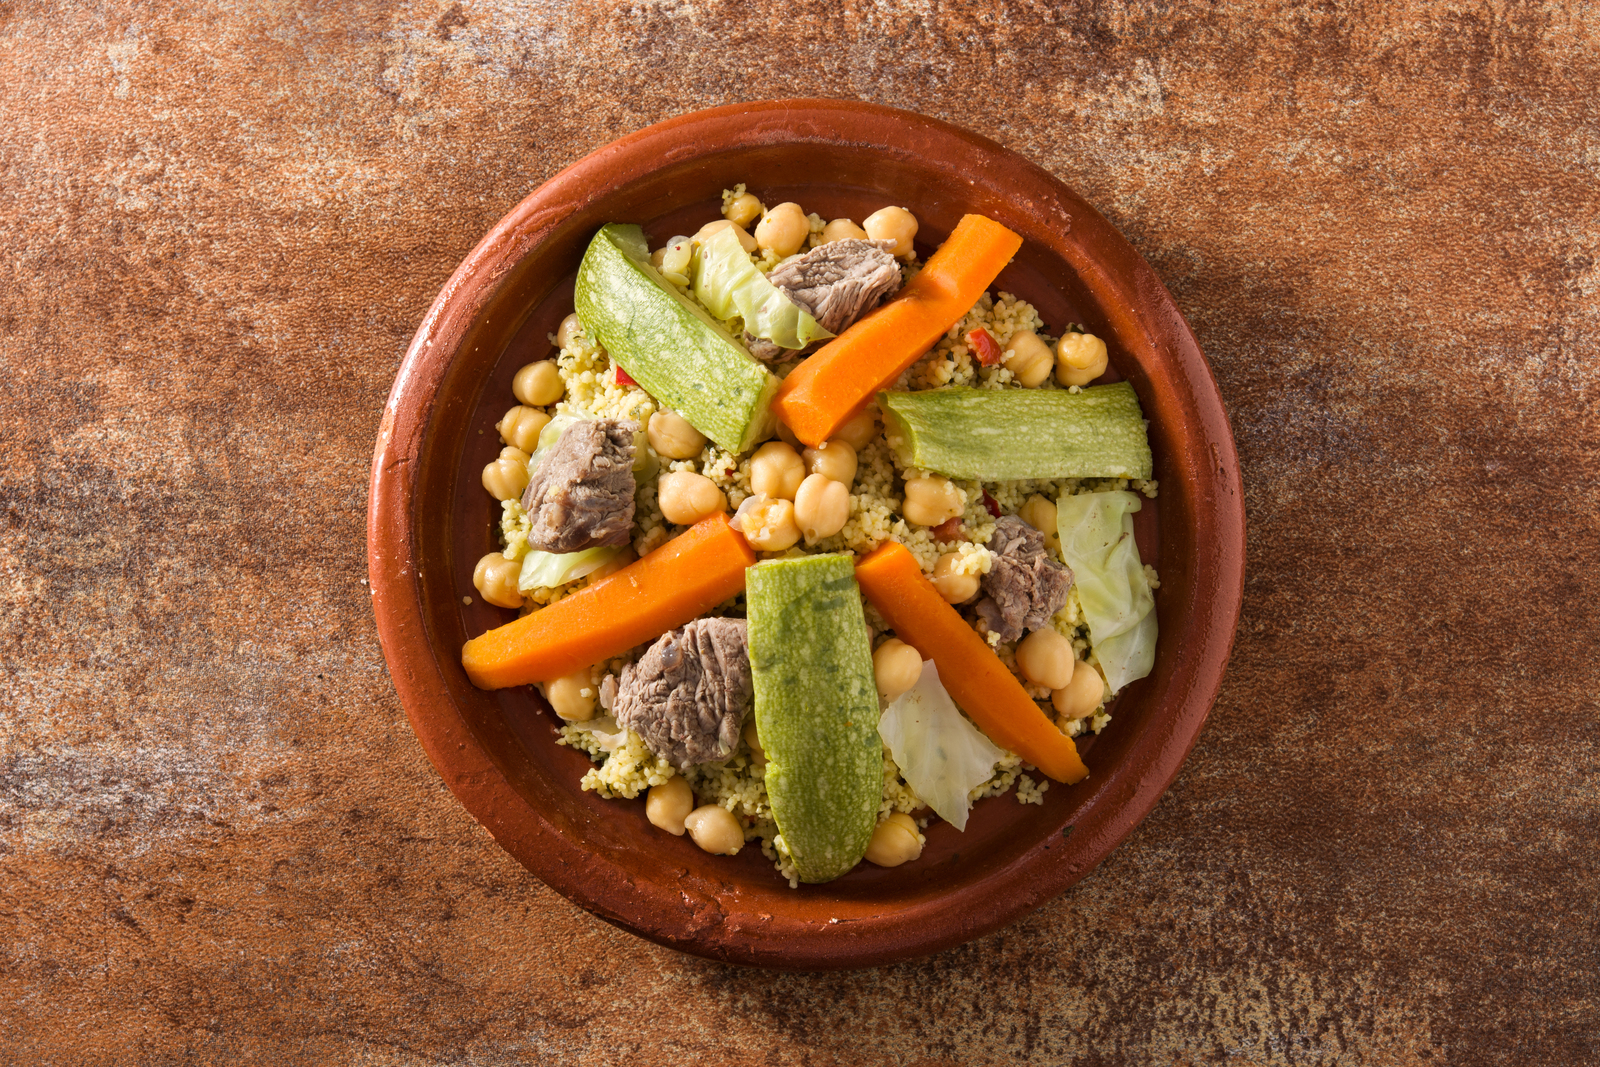 Couscous in a traditional pot, chickpeas, zucchini, carrots and meat